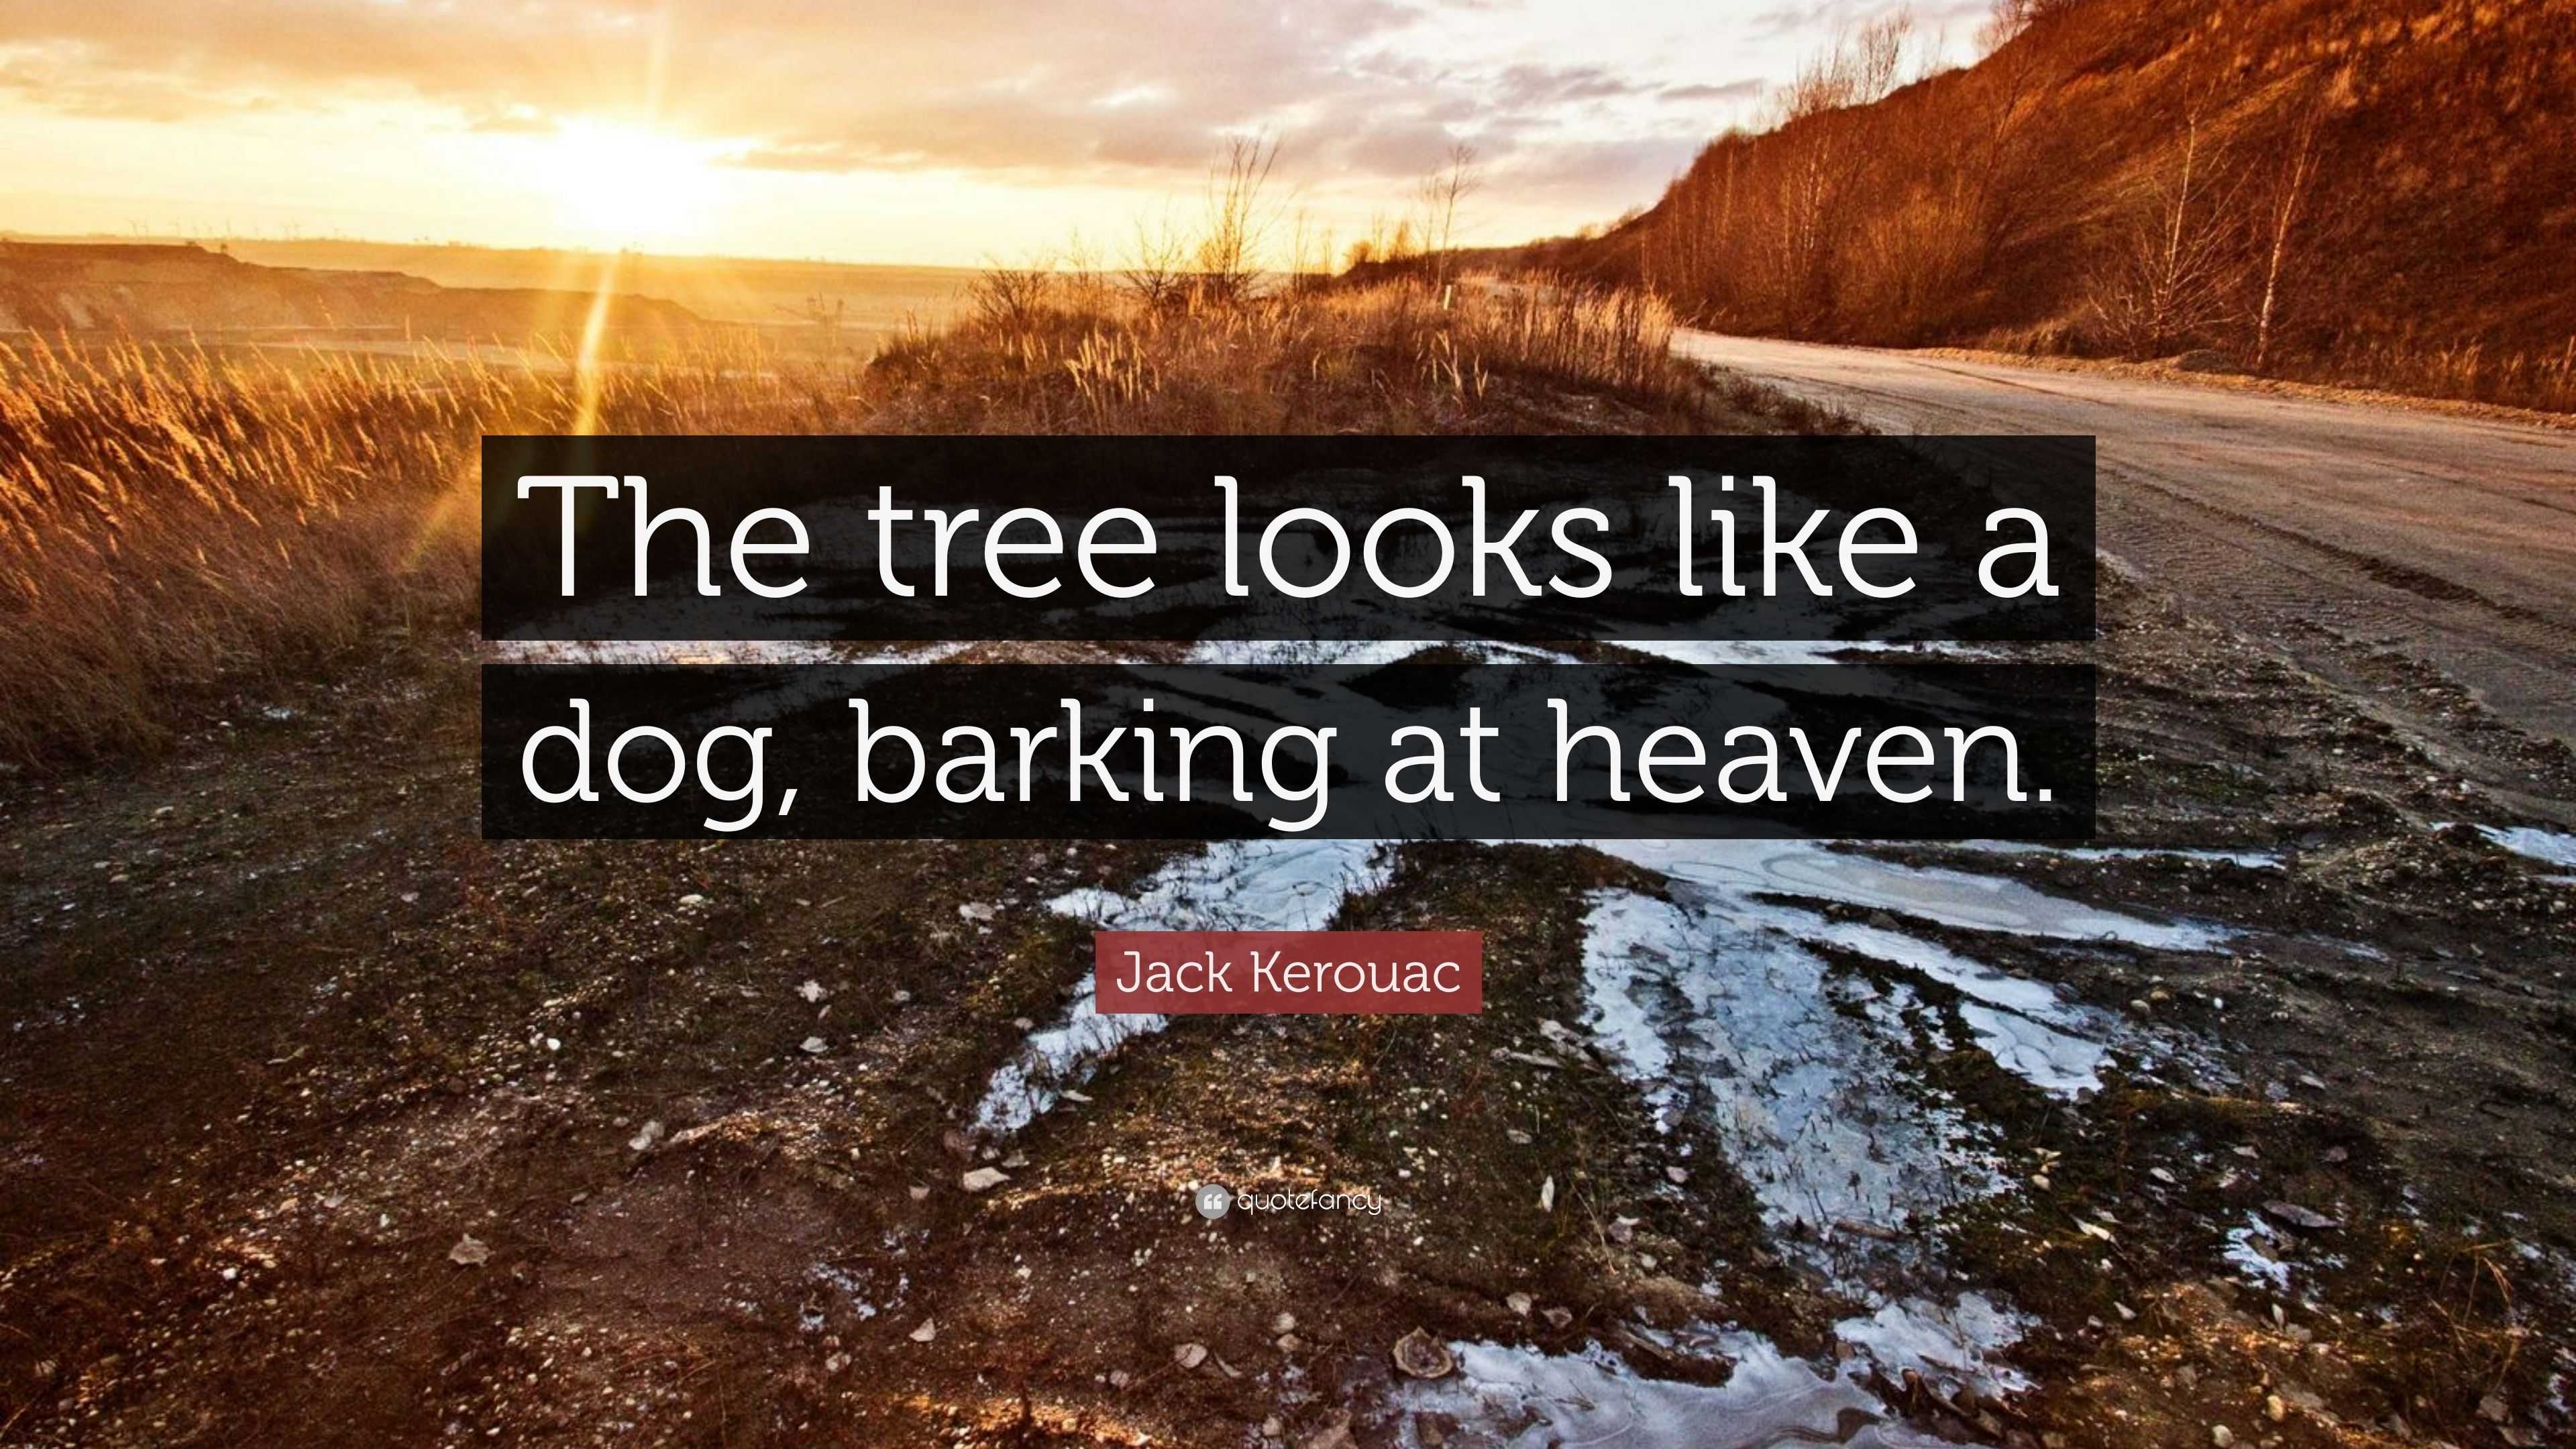 Jack Kerouac Quote “The tree looks like a dog barking at heaven